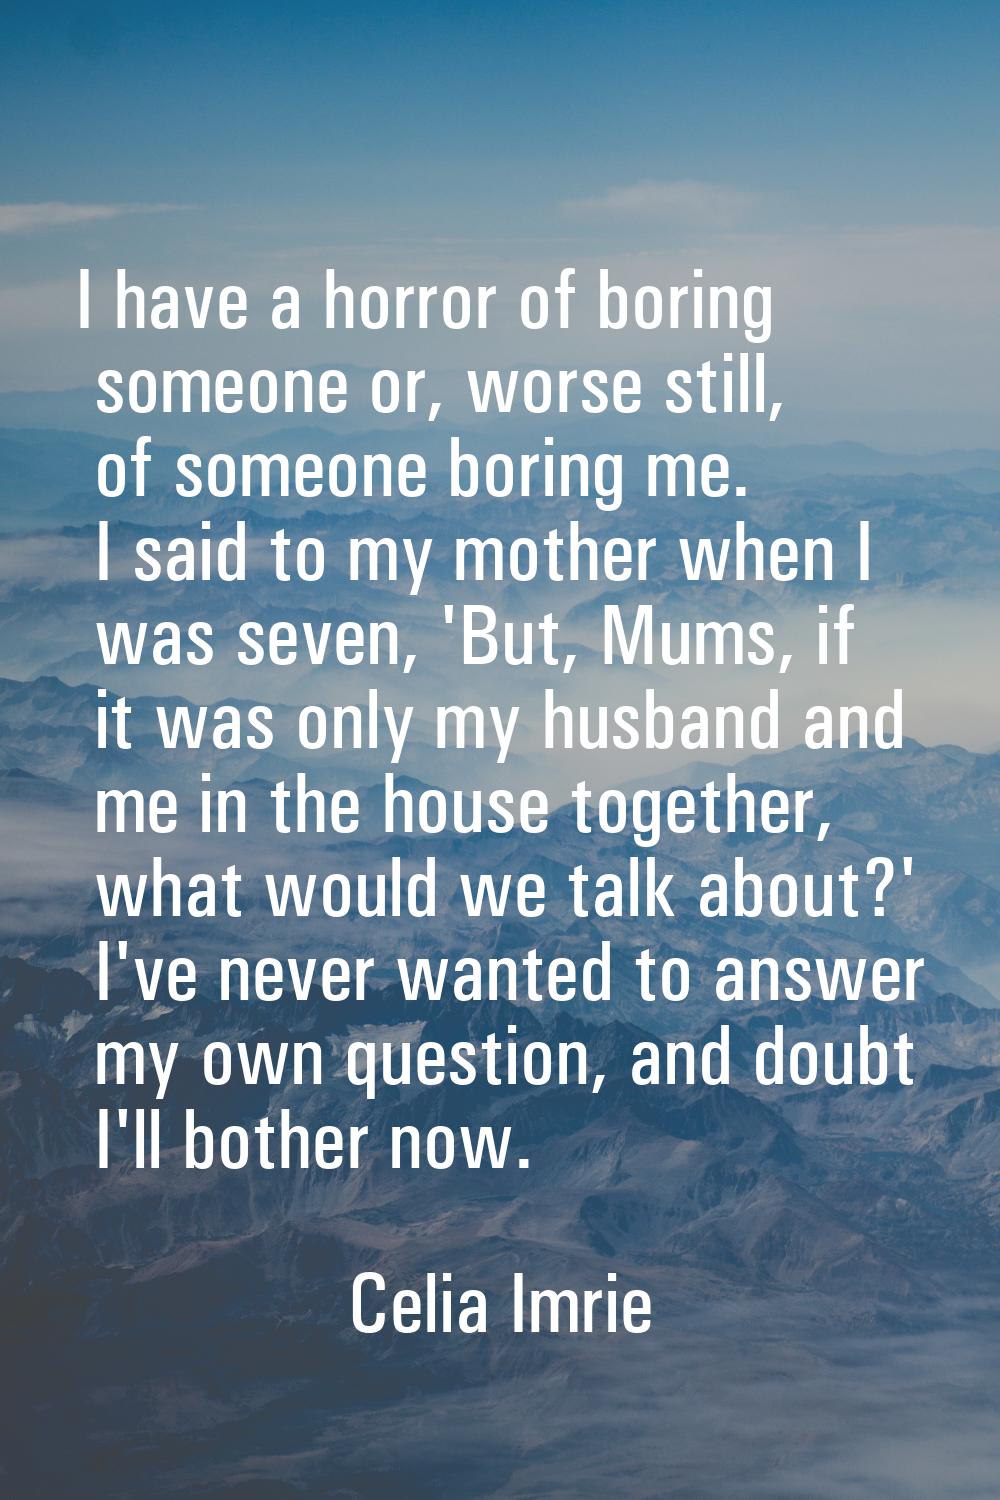 I have a horror of boring someone or, worse still, of someone boring me. I said to my mother when I